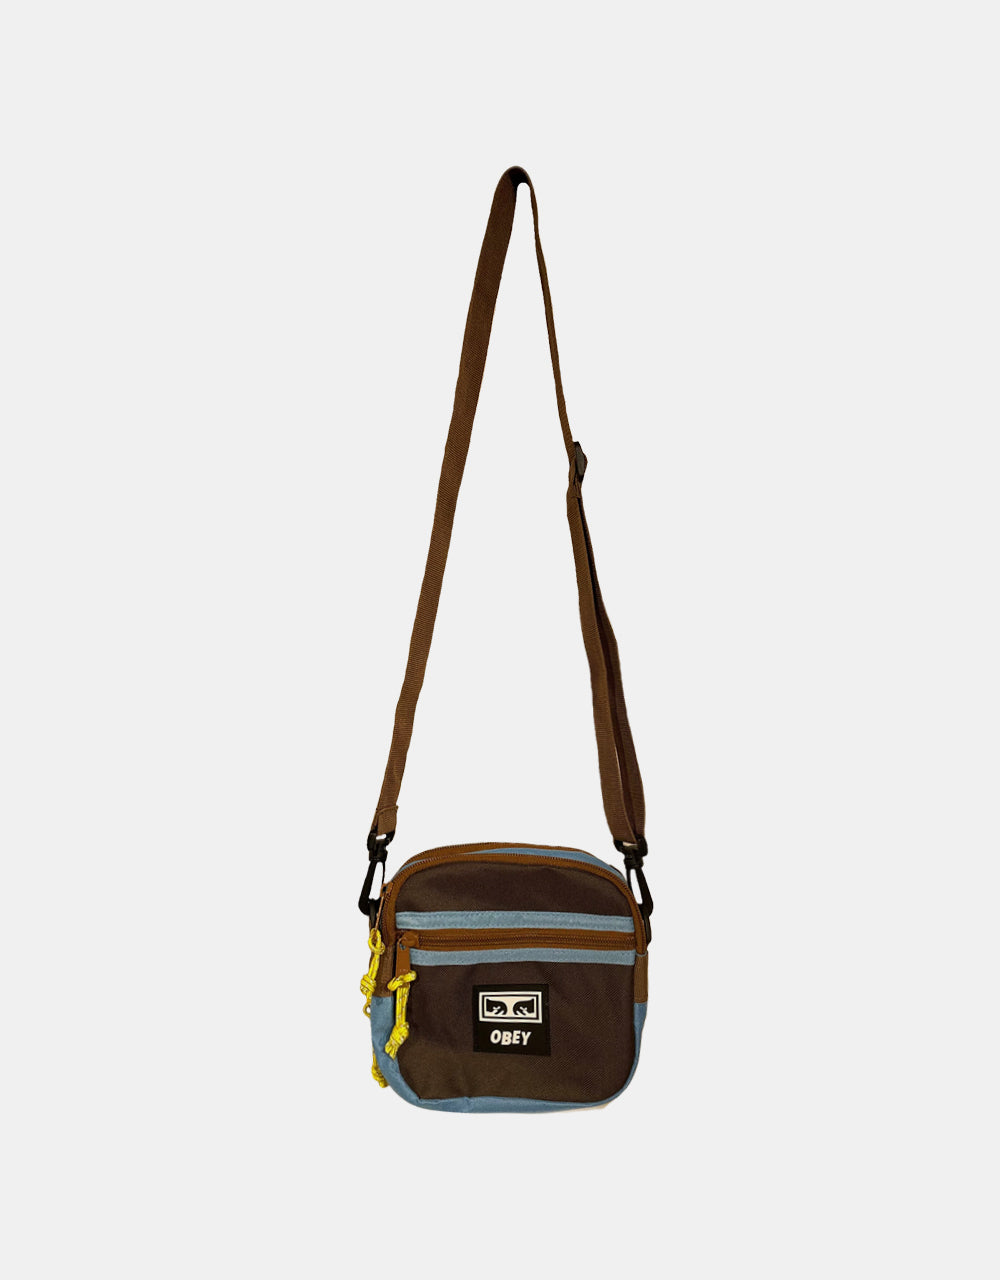 Obey Conditions Traveler Bag lll - Brown Multi